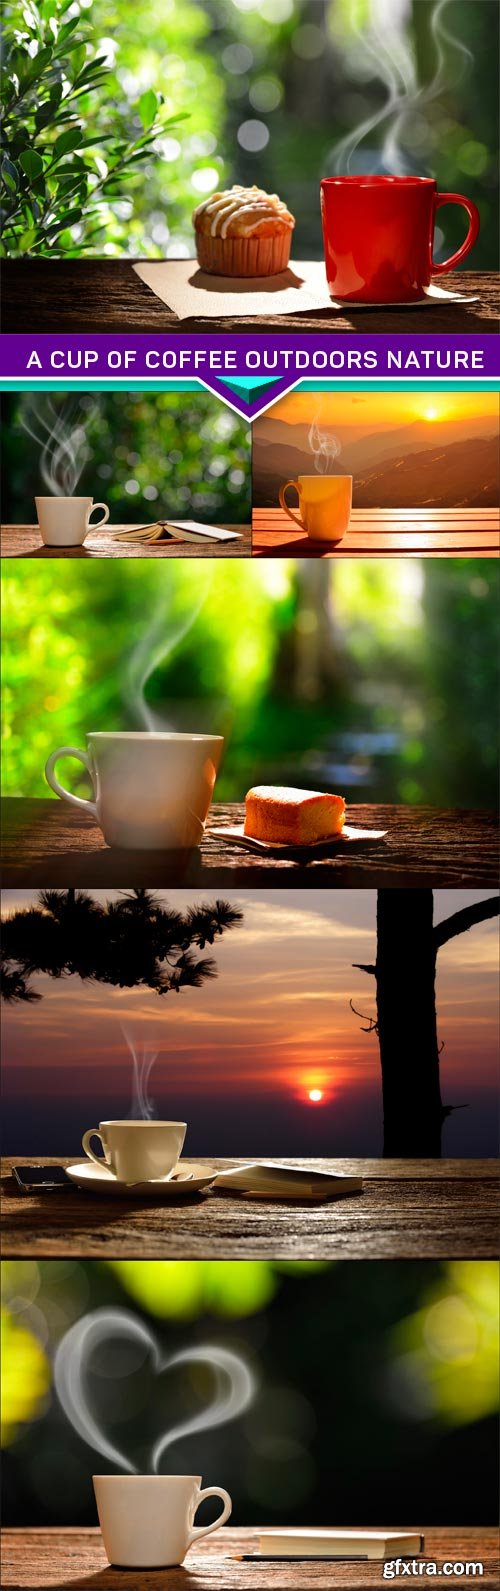 A cup of coffee outdoors nature 6X JPEG